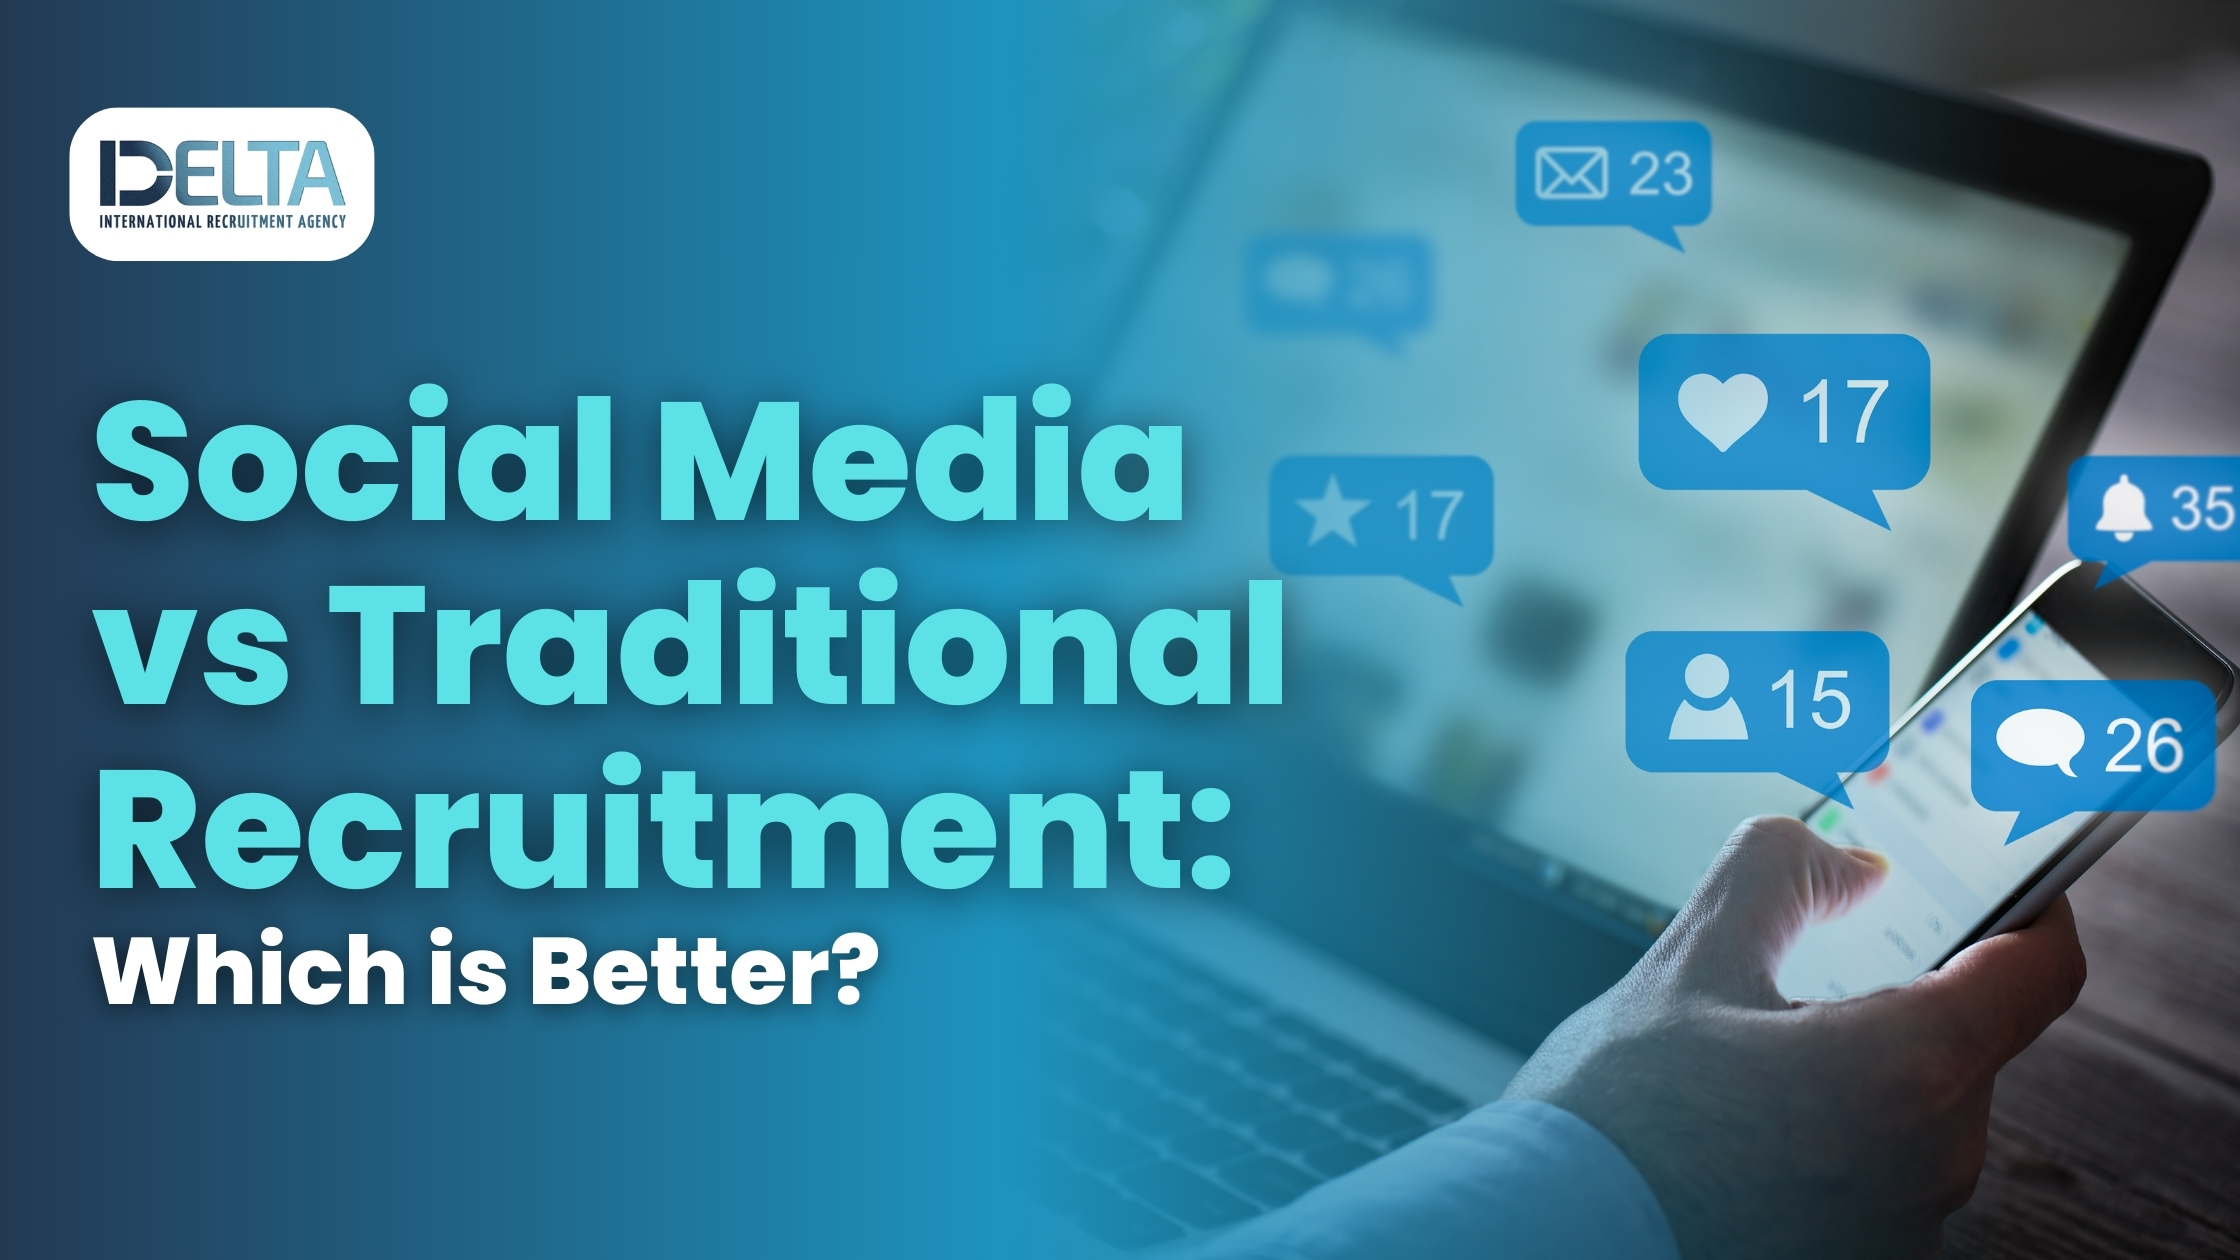 Social Media vs Traditional Recruitment: Which is Better?